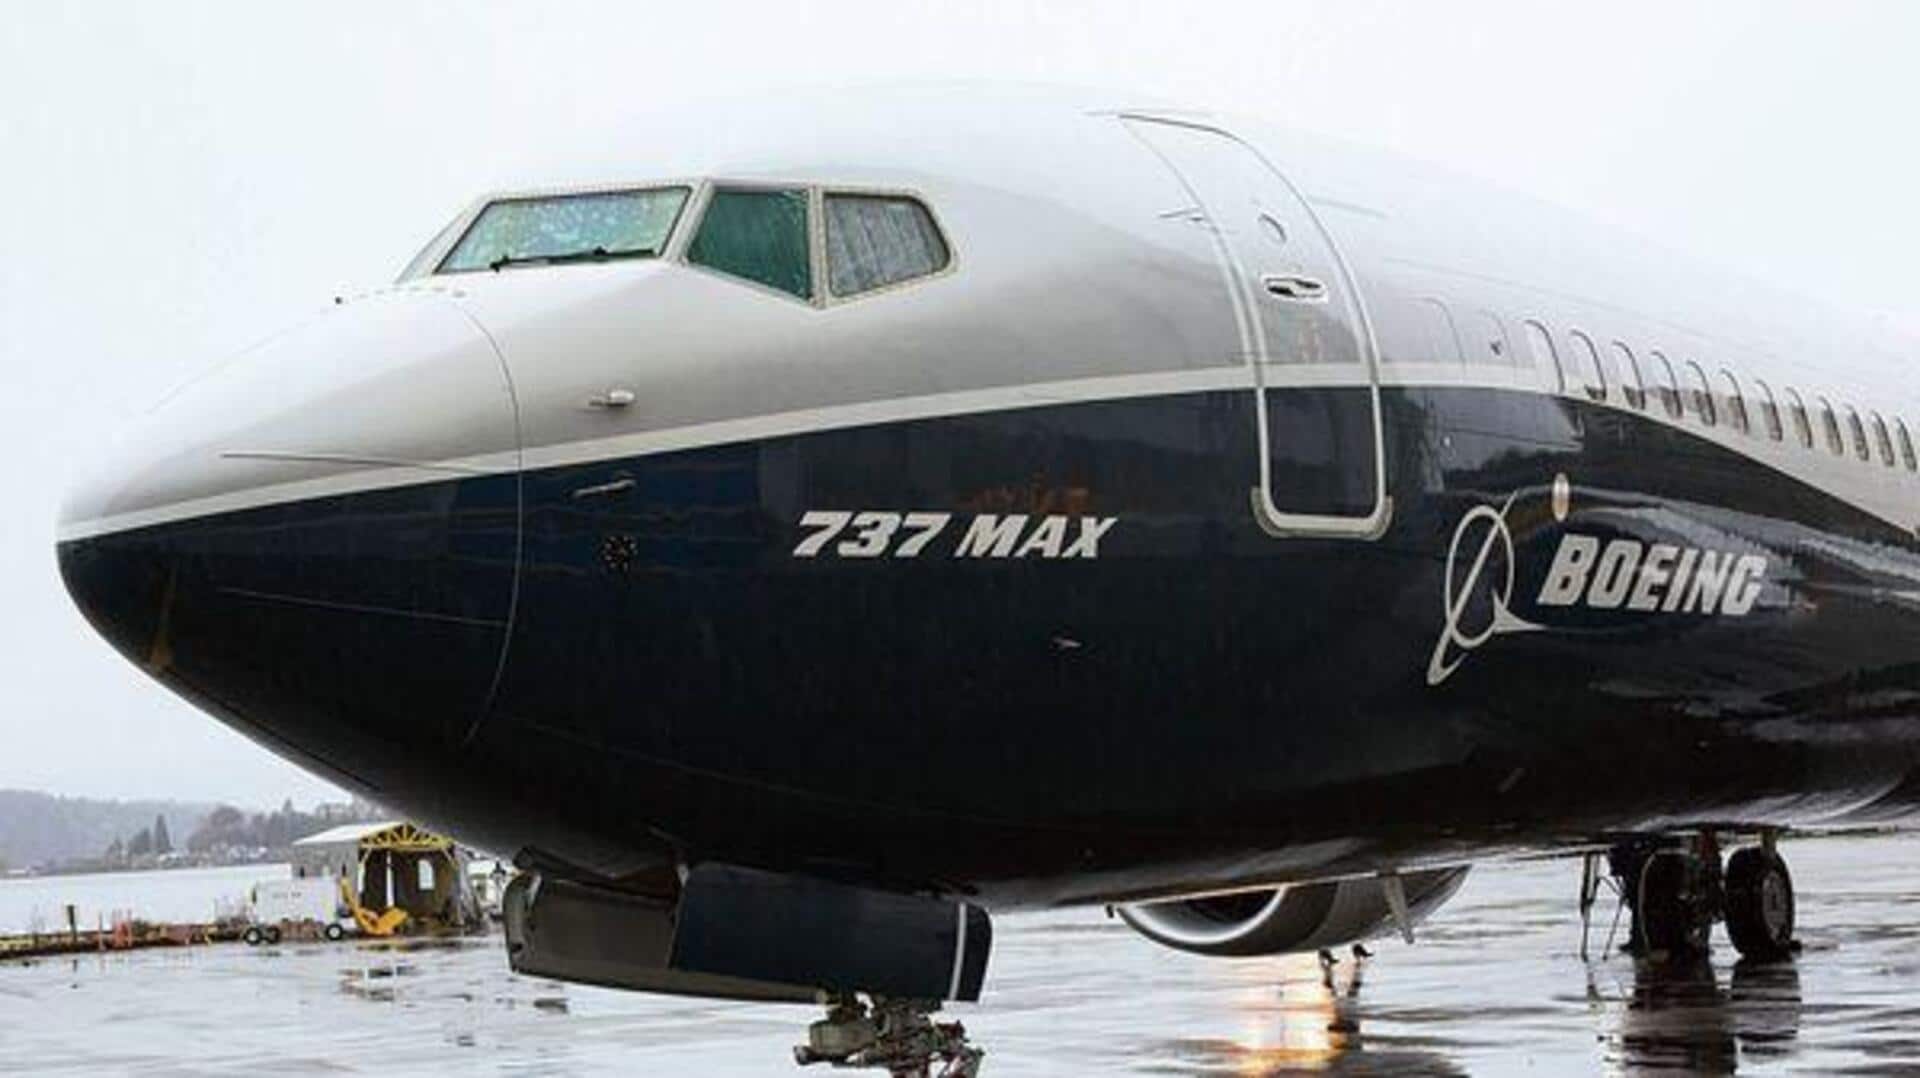 What's the controversy surrounding Boeing 737 MAX 9 planes